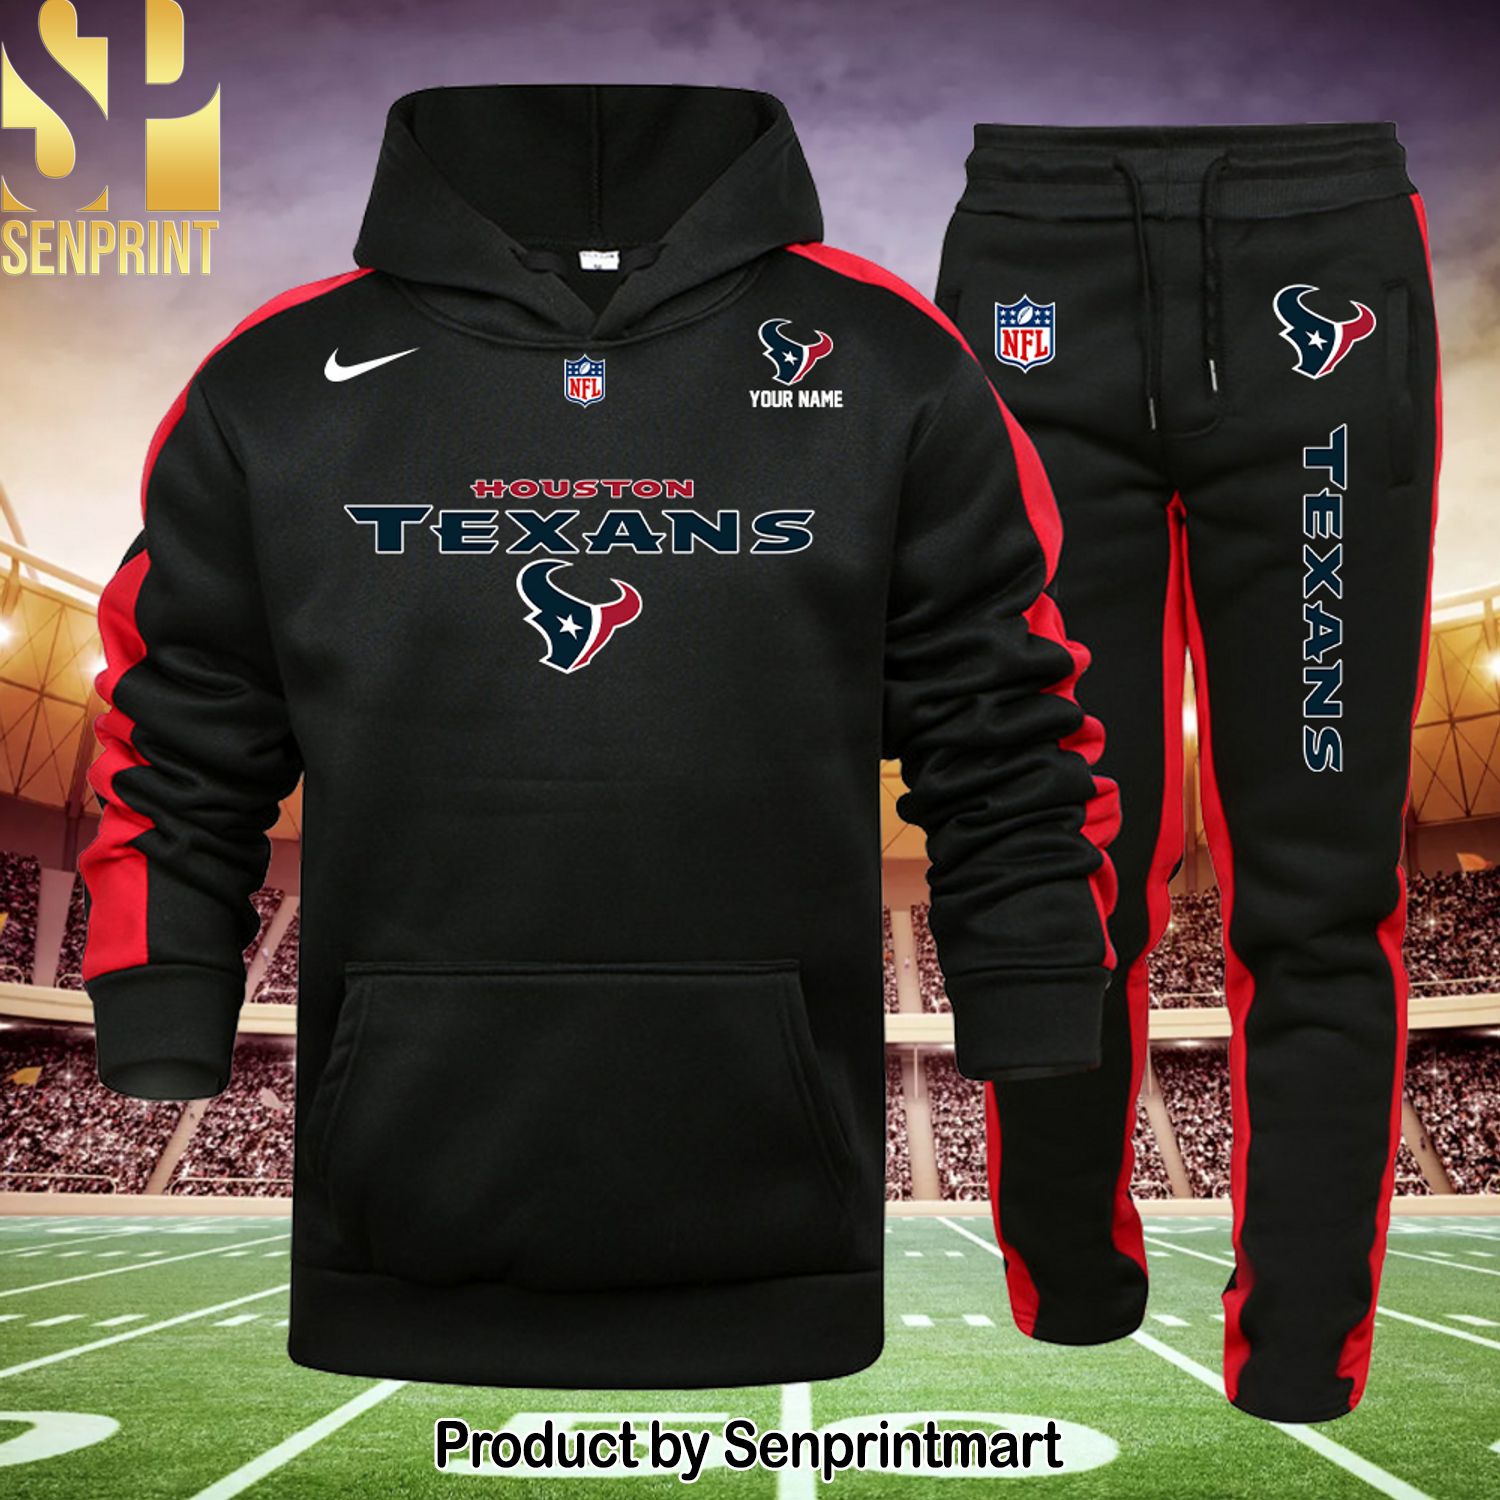 NFL Houston Texans Best Outfit Shirt and Sweatpants